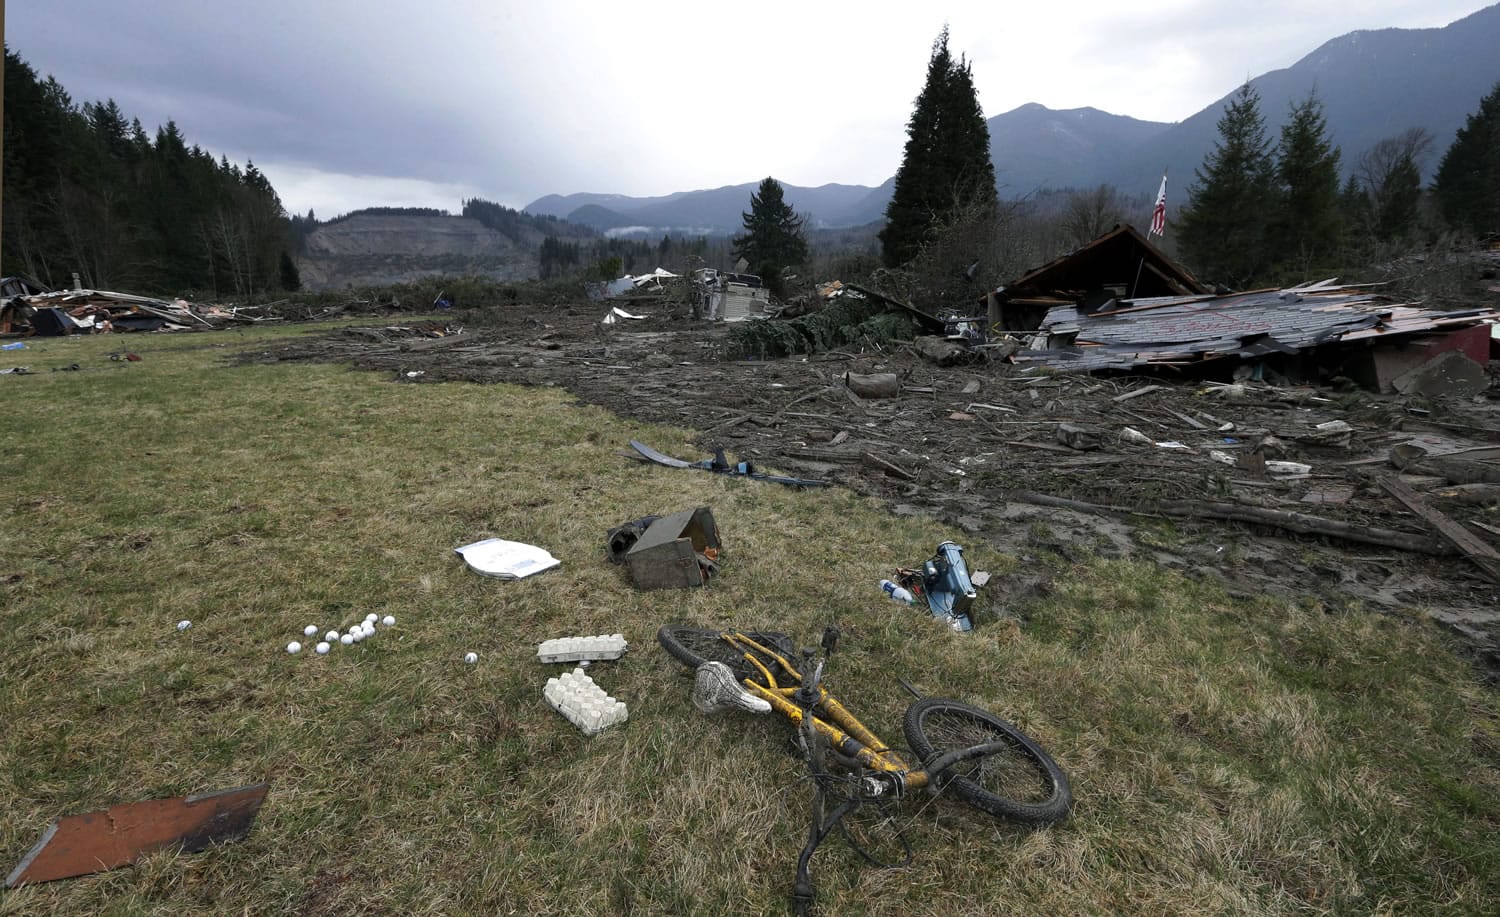 A child's bicycle is with other remains at the edge of the scene of a deadly mudslide from the barren hillside beyond Tuesday in Oso, Wash.